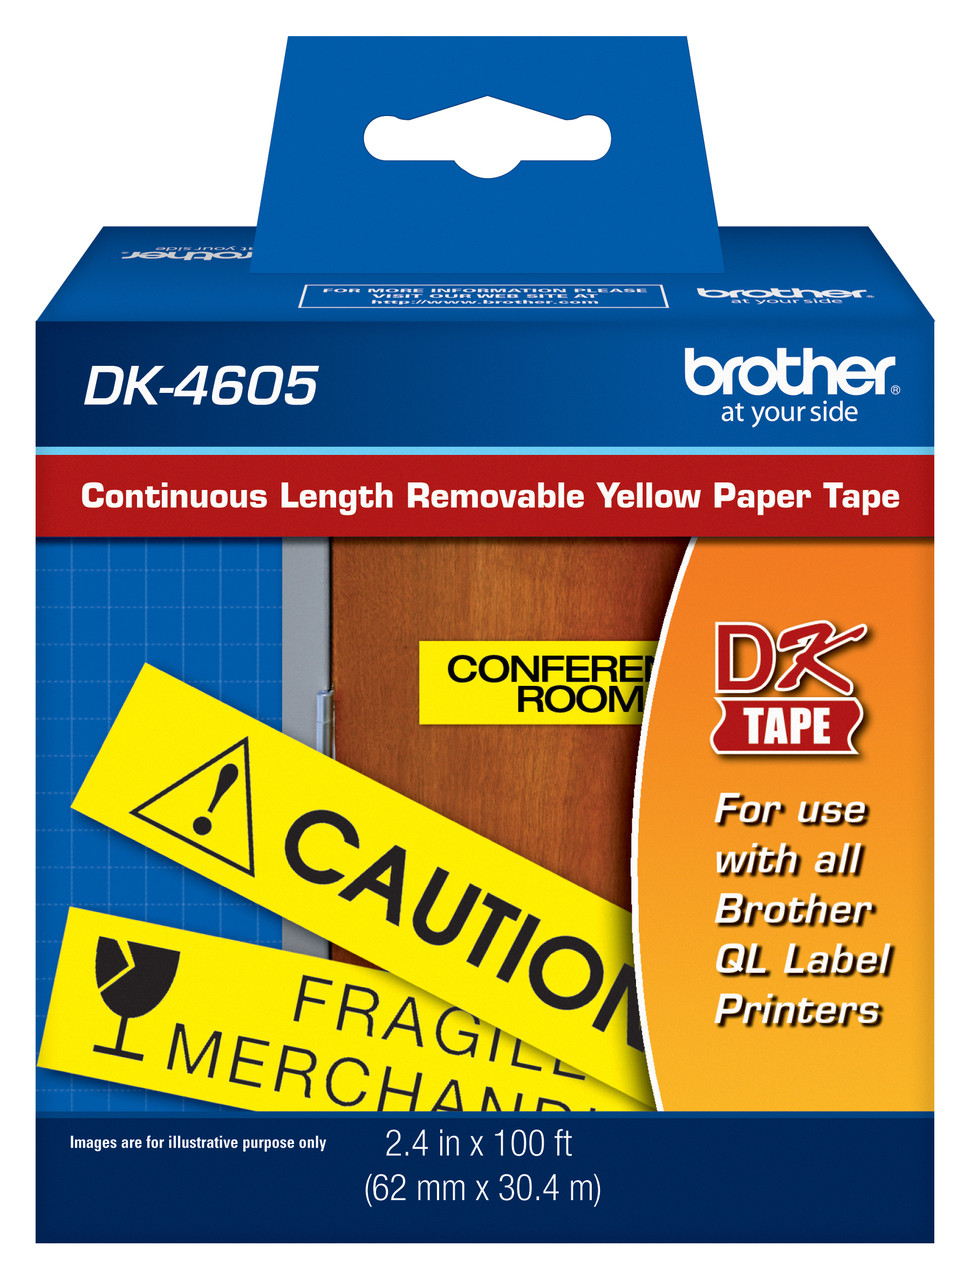 brother-dk4605-removable-continuous-yellow-paper-label